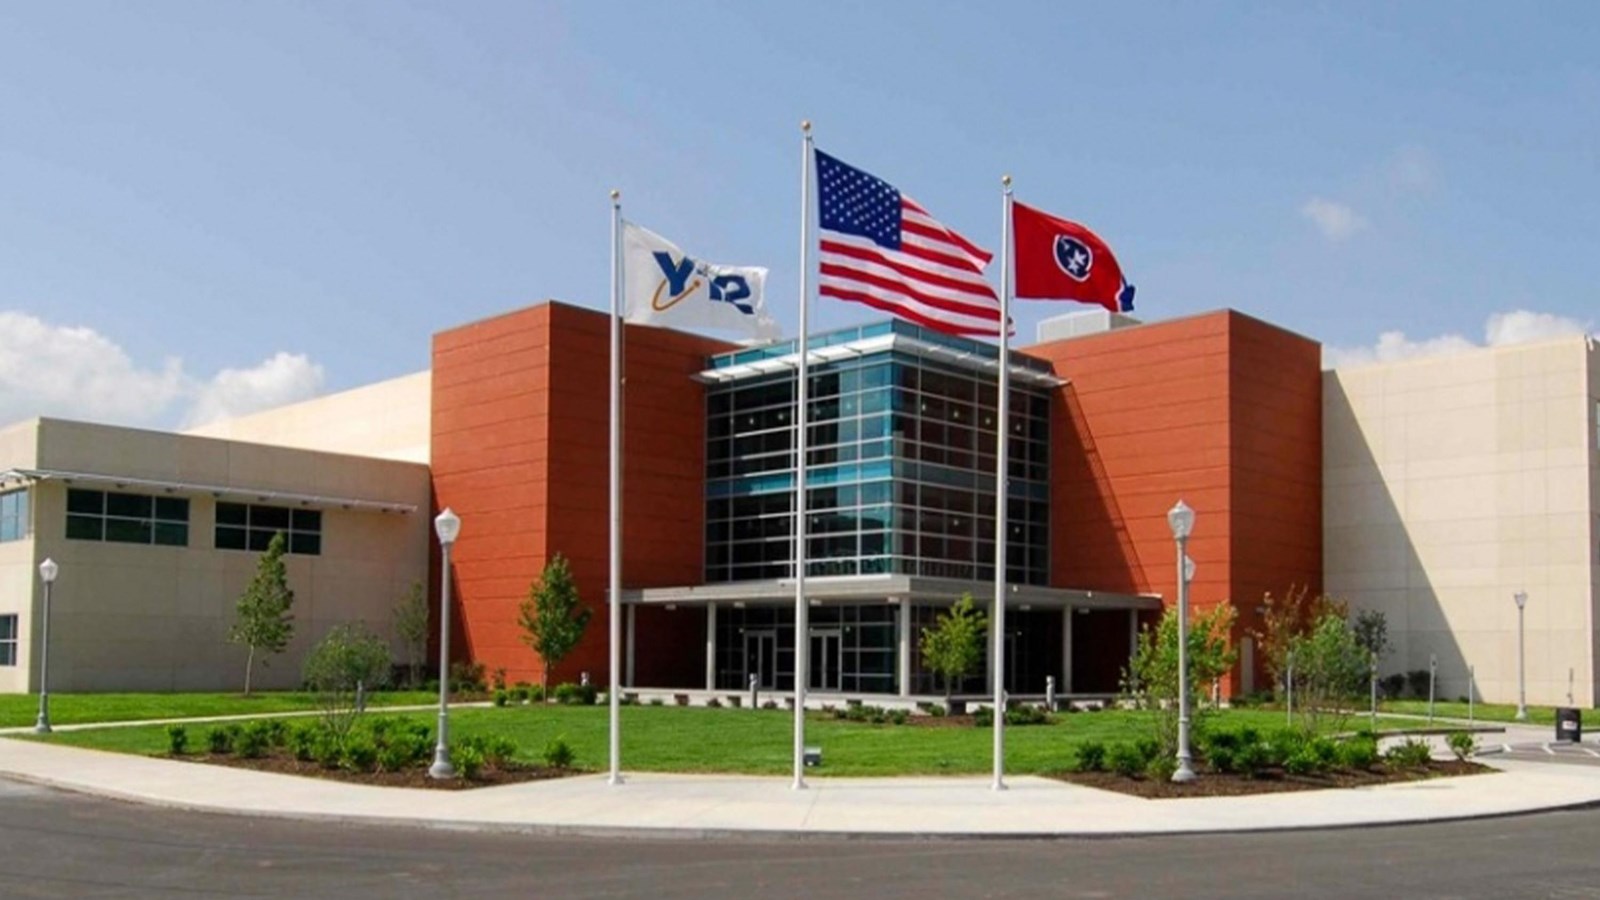 A modern, sunlit office complex with several flags flying in front